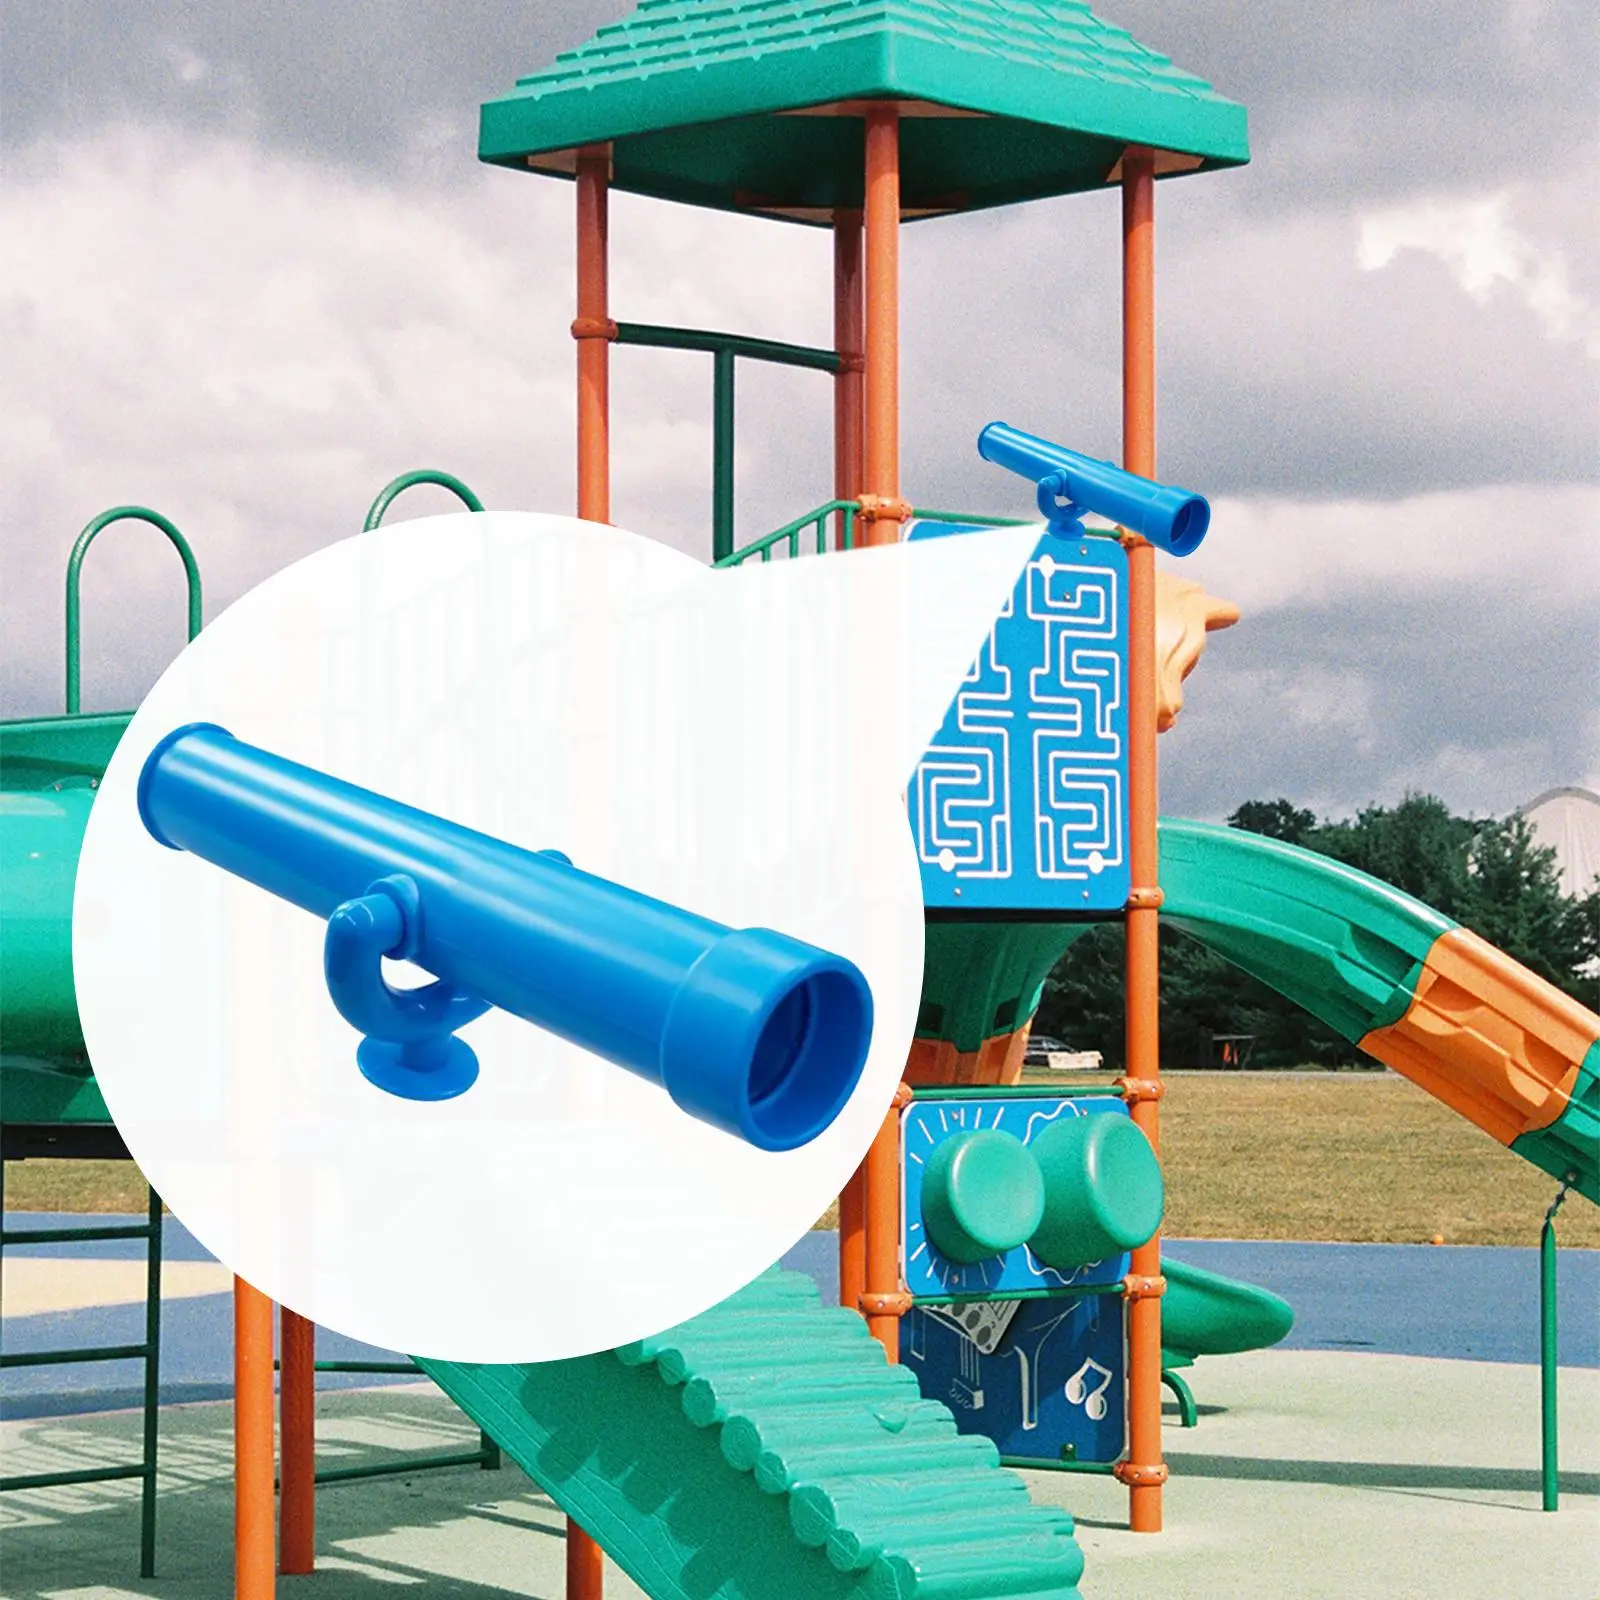 Playground Telescope Toy Science Toy for Kids Educational Toy Pirate Telescope for Gym Playhouse Outdoor Backyard Accessories